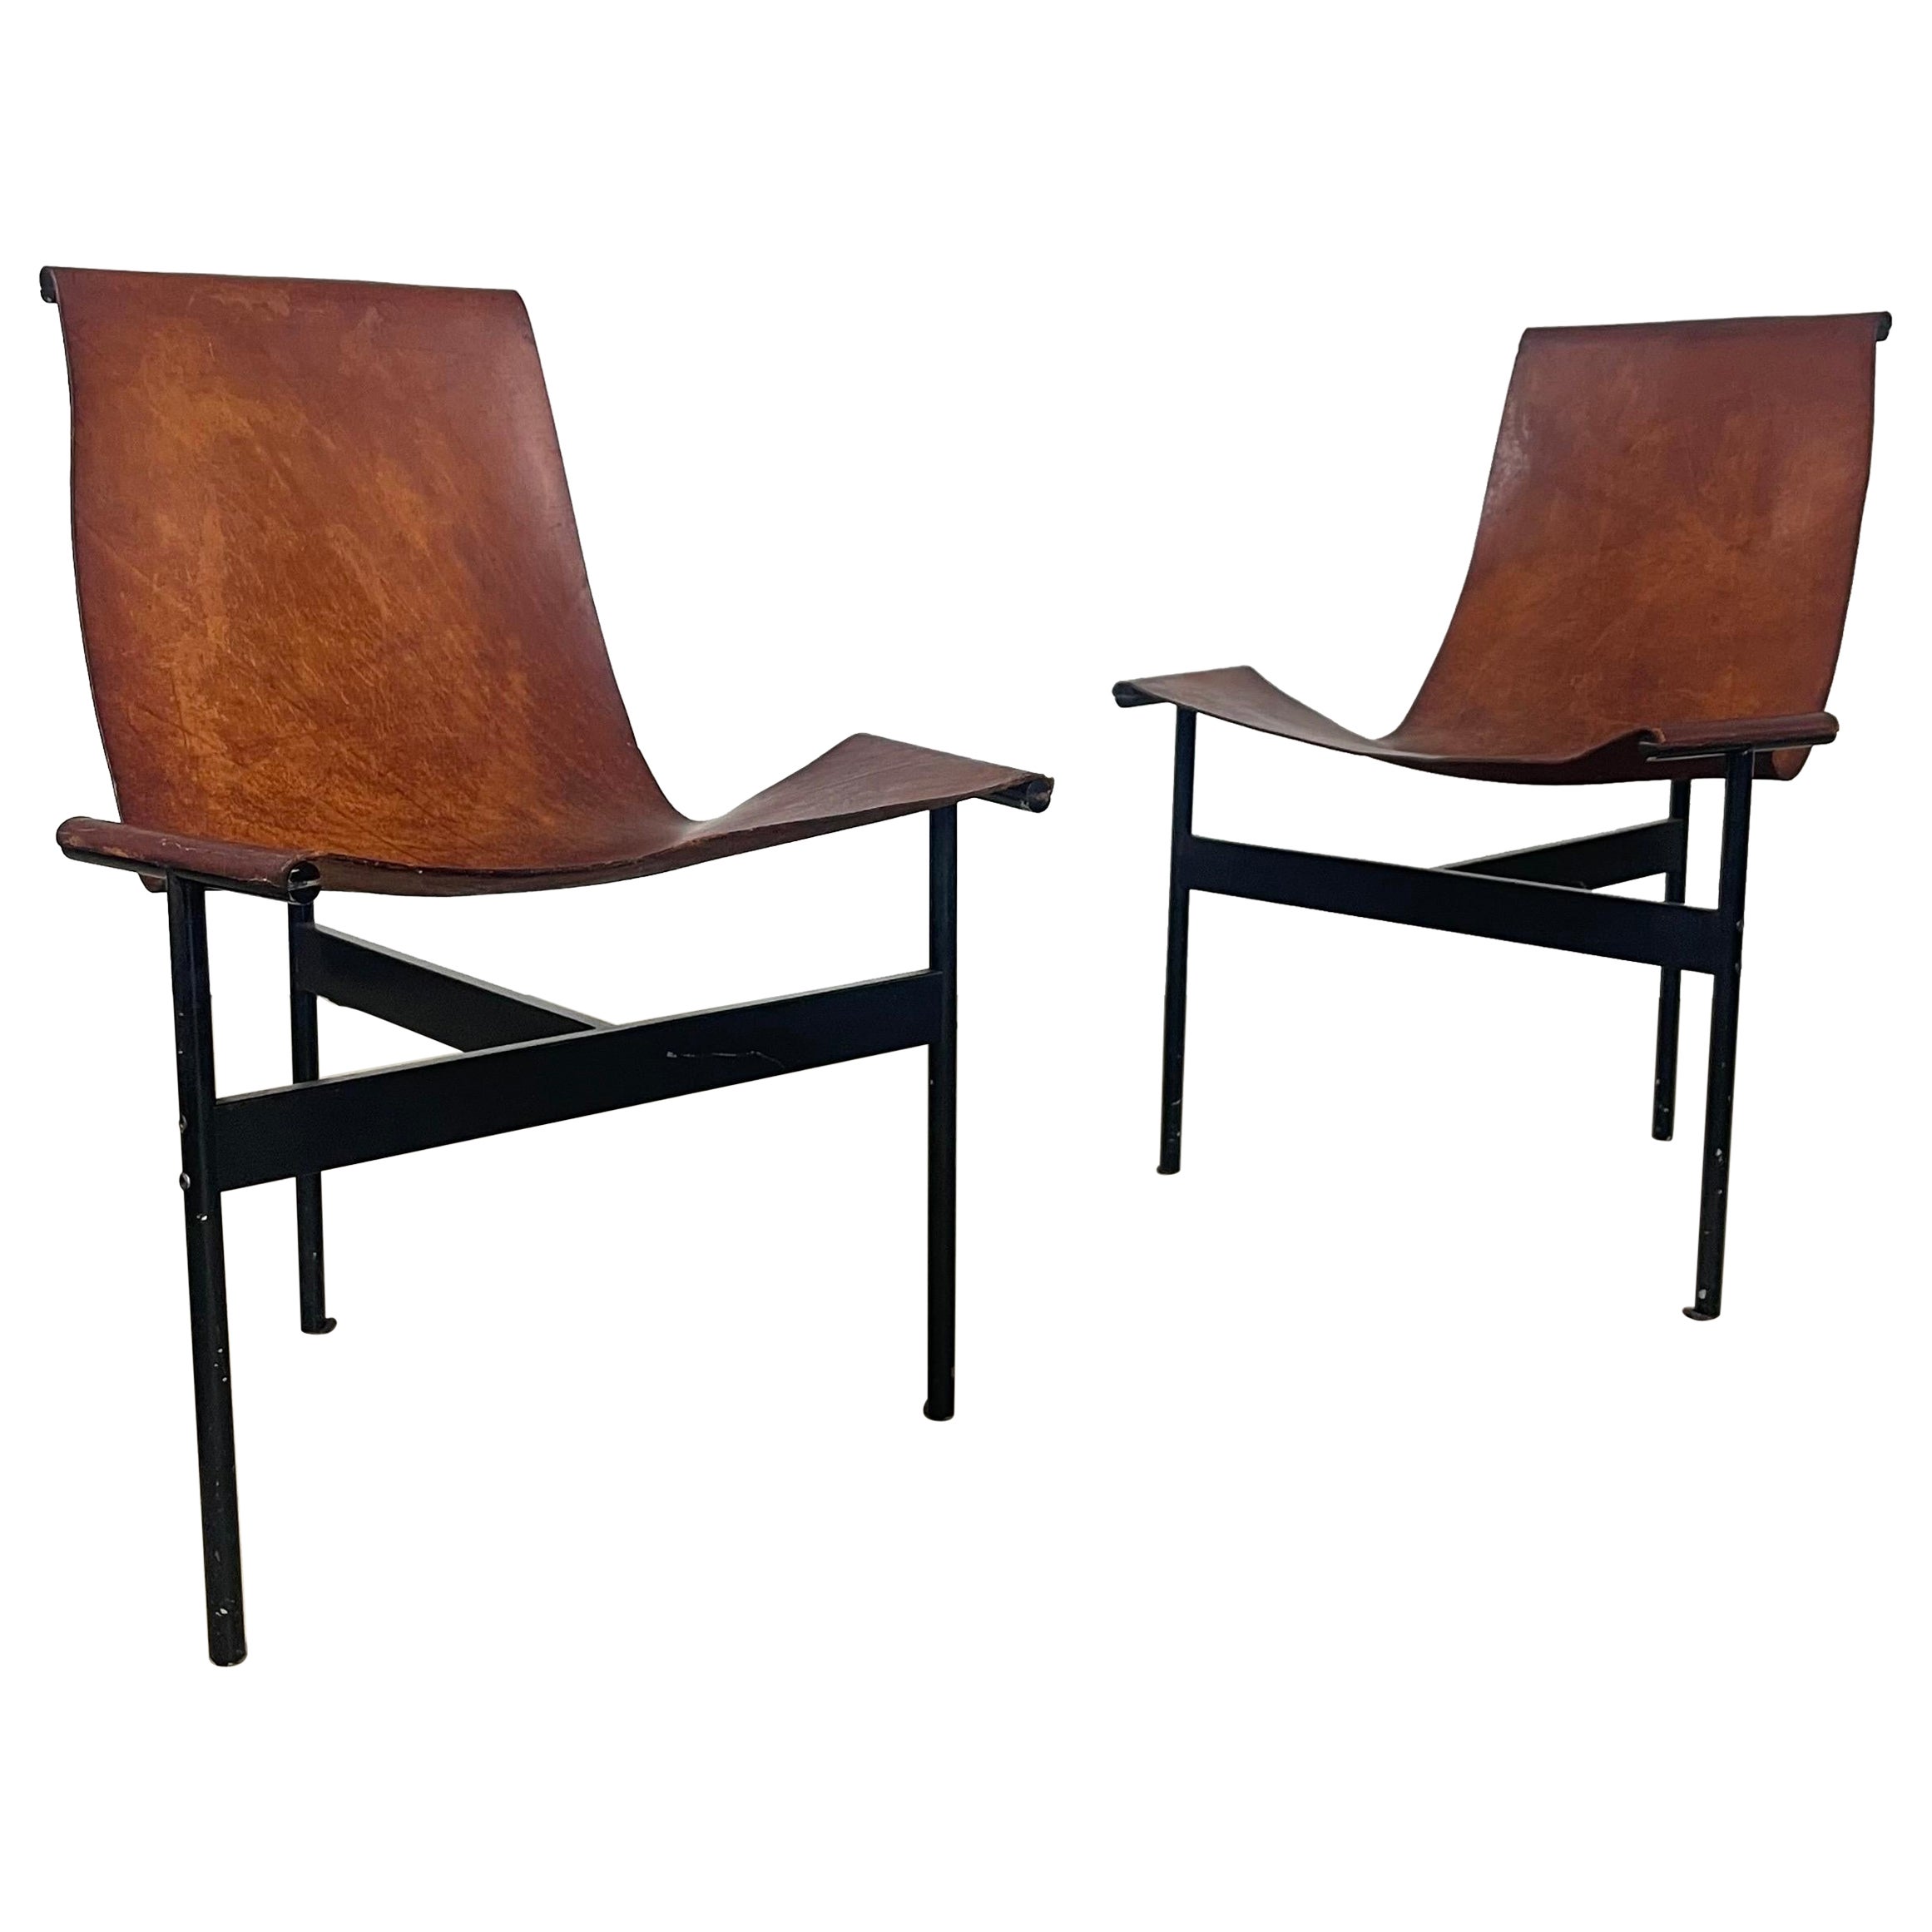 Pair of T Side Chairs by Katavalos, Littell, and Kelly for Laverne International